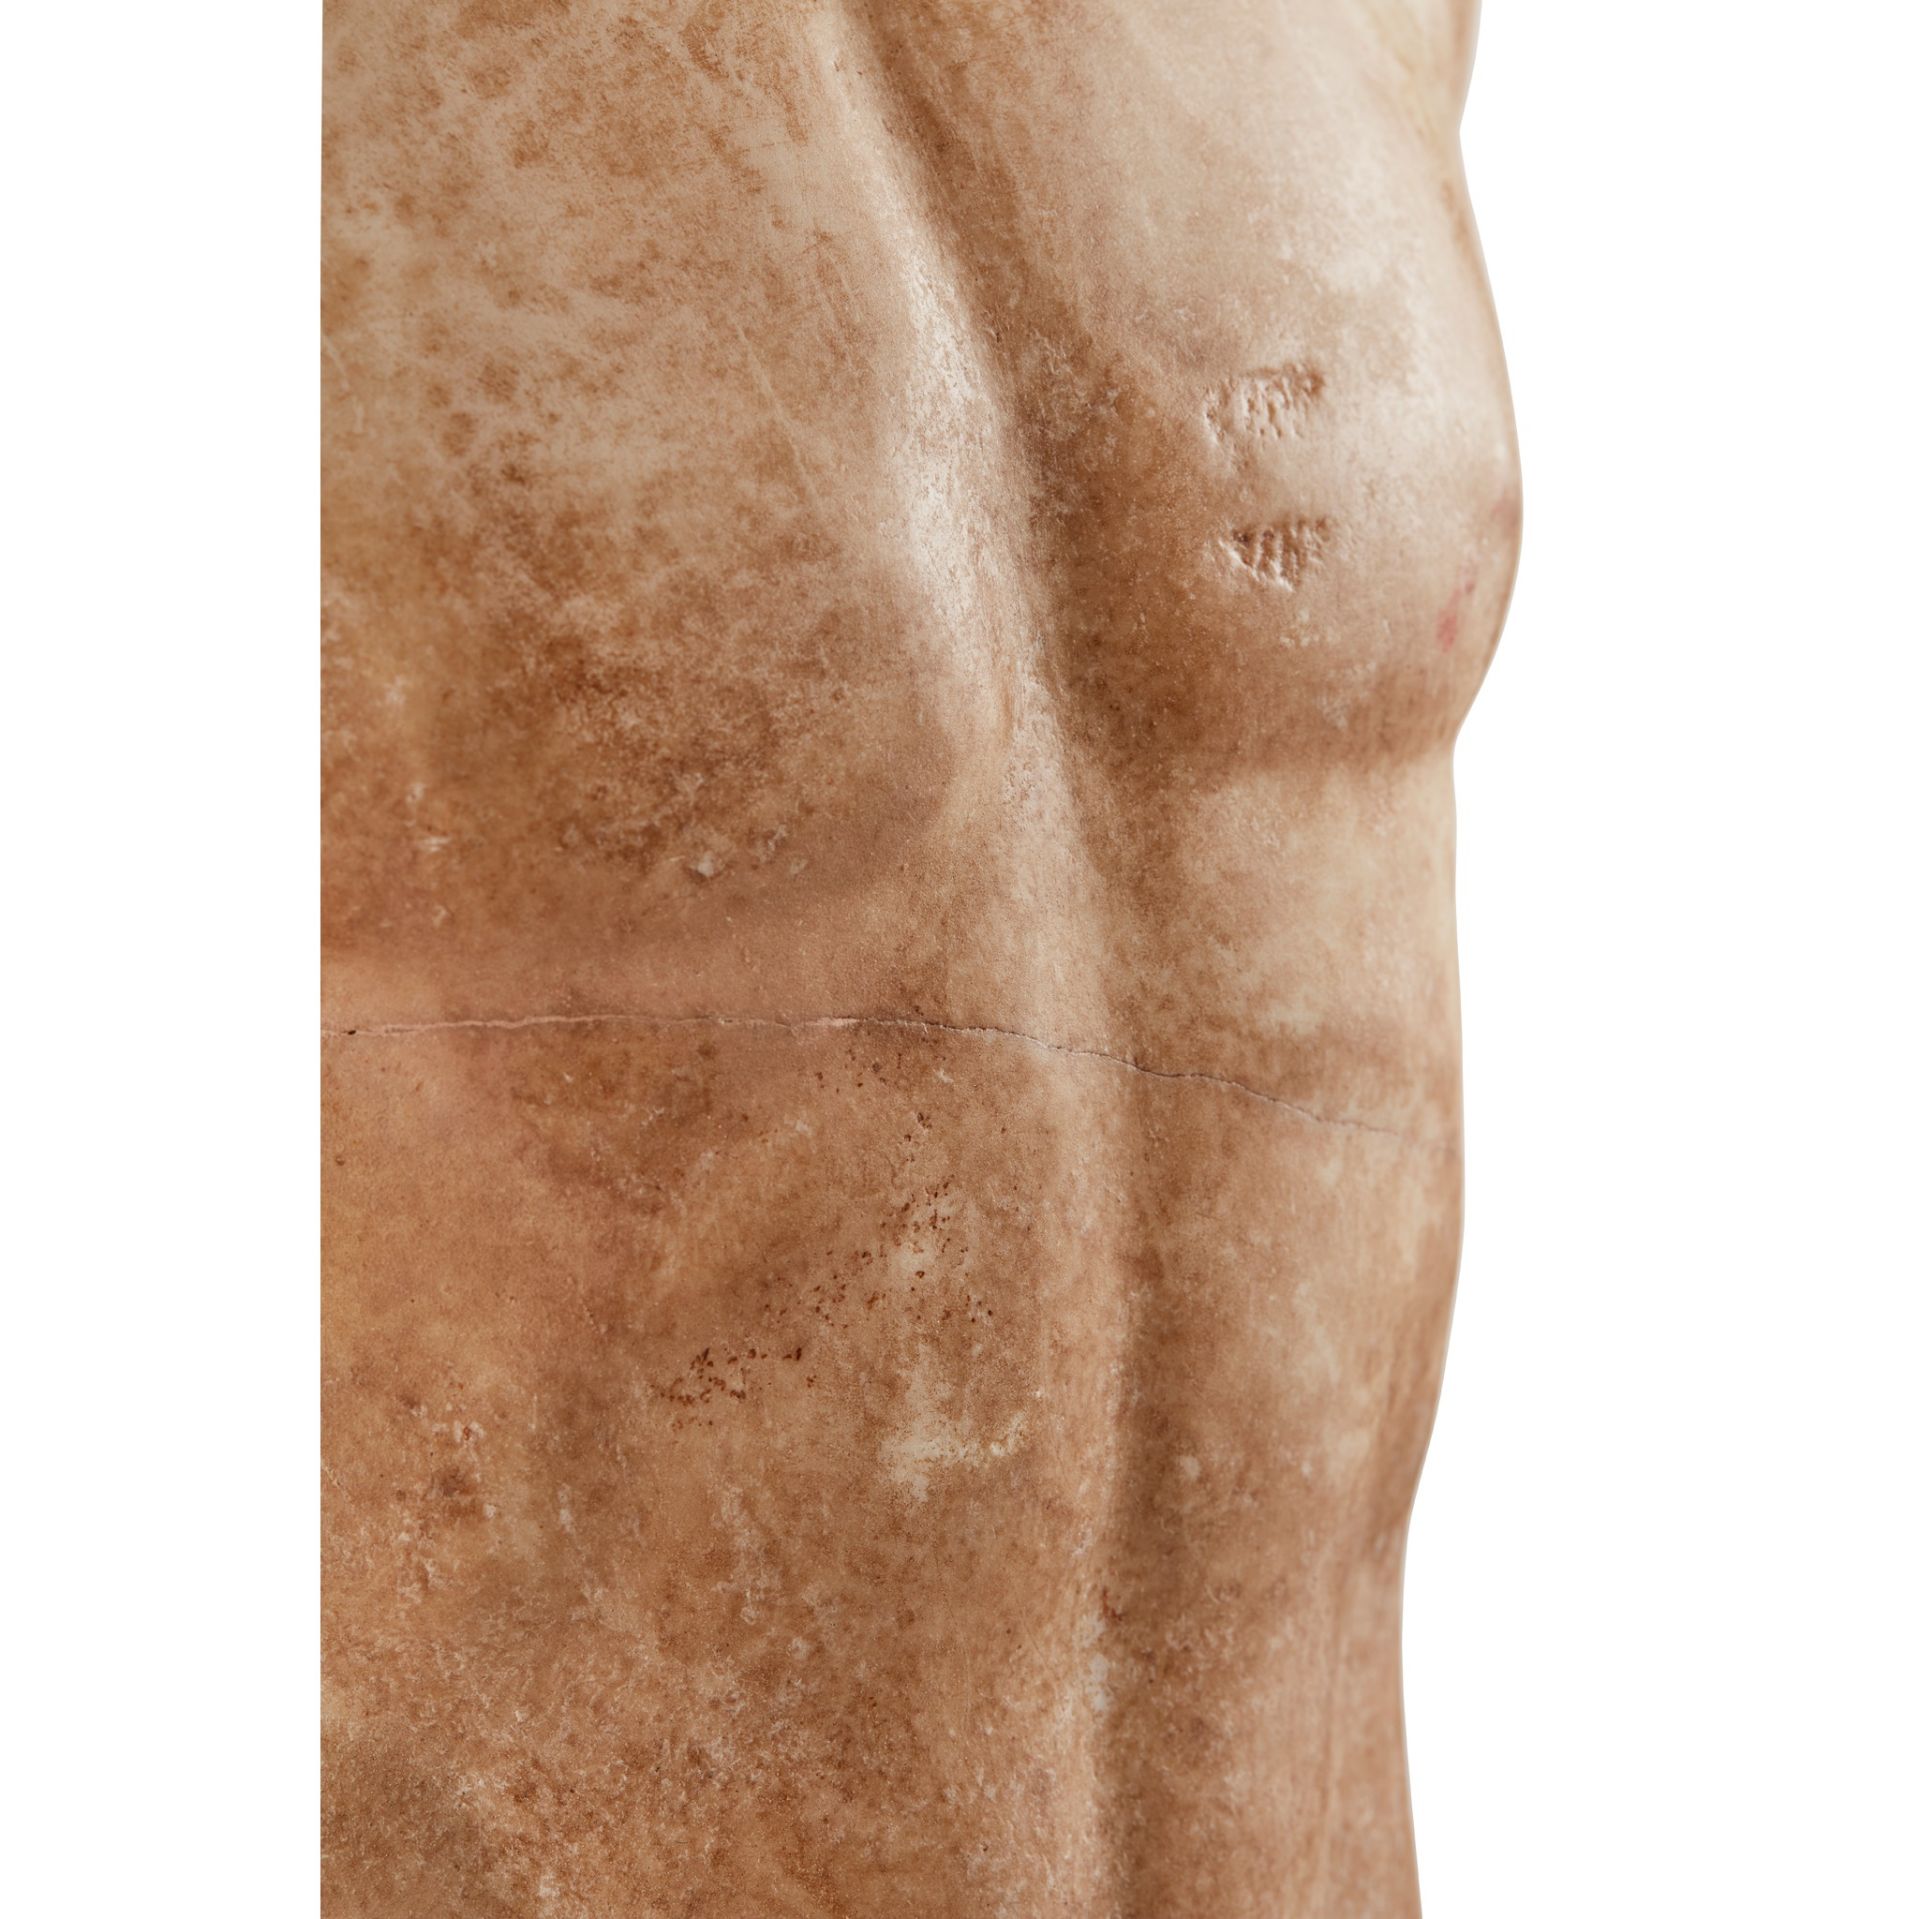 ◆ LIFE-SIZED ANCIENT ROMAN MARBLE TORSO OF A YOUNG MAN C. 1ST - 2ND CENTURY AD - Image 5 of 13